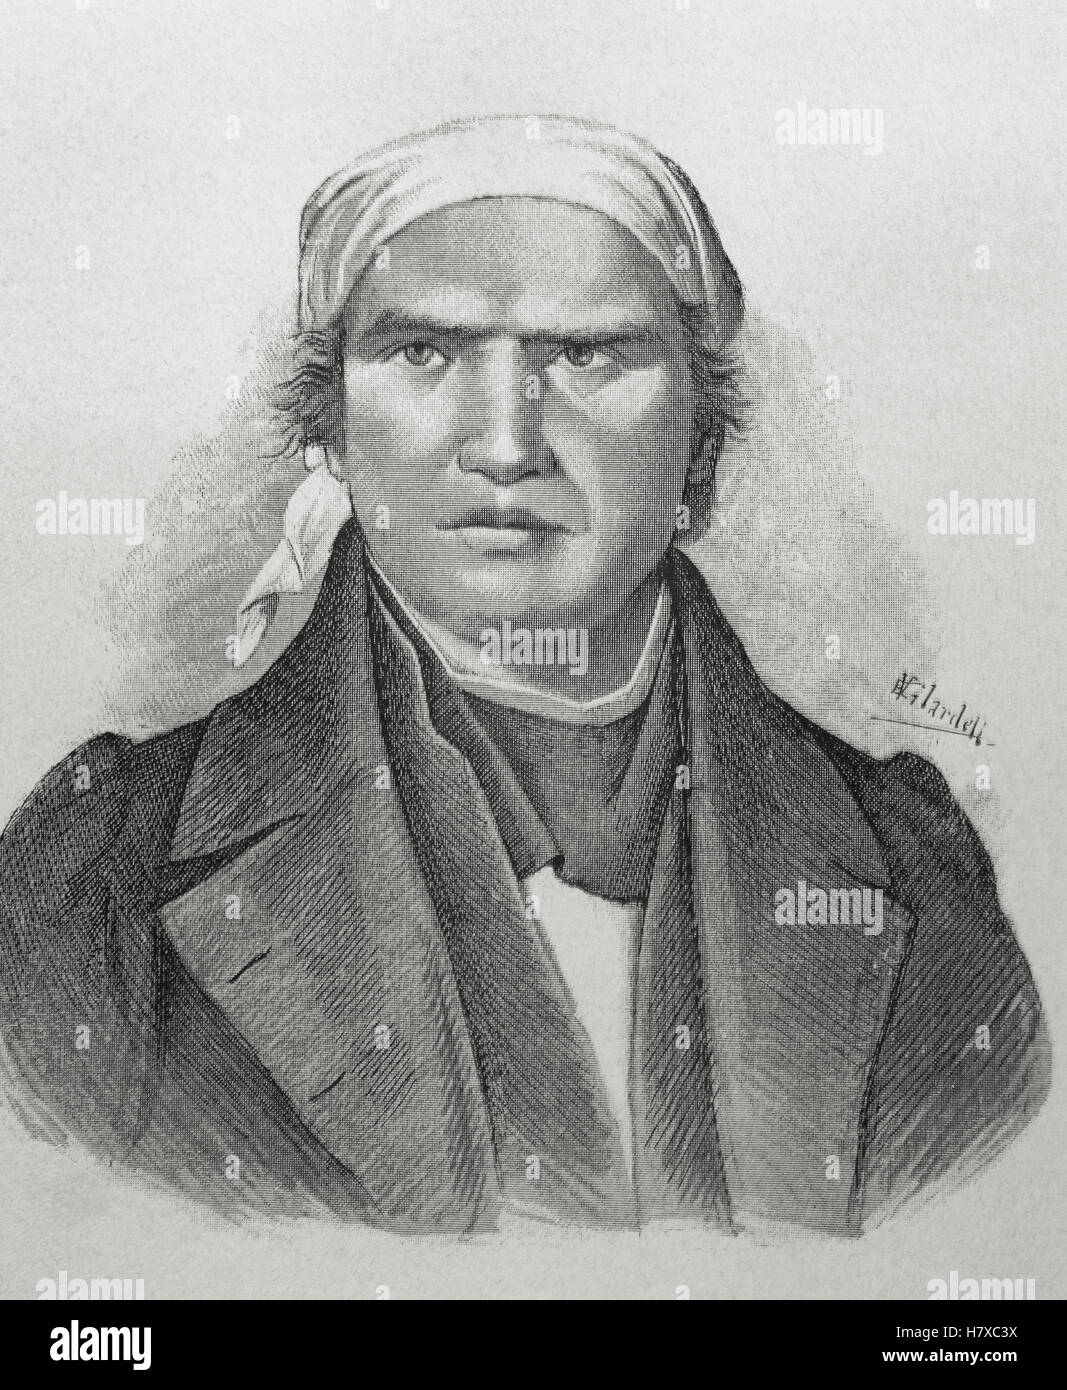 Jose María Morelos (1765-1815). Mexican priest and patriot, struggling for independence of Mexico. Portrait. Engraving in 'Americanos Celebres', 1888. By E. Vilardell. Stock Photo